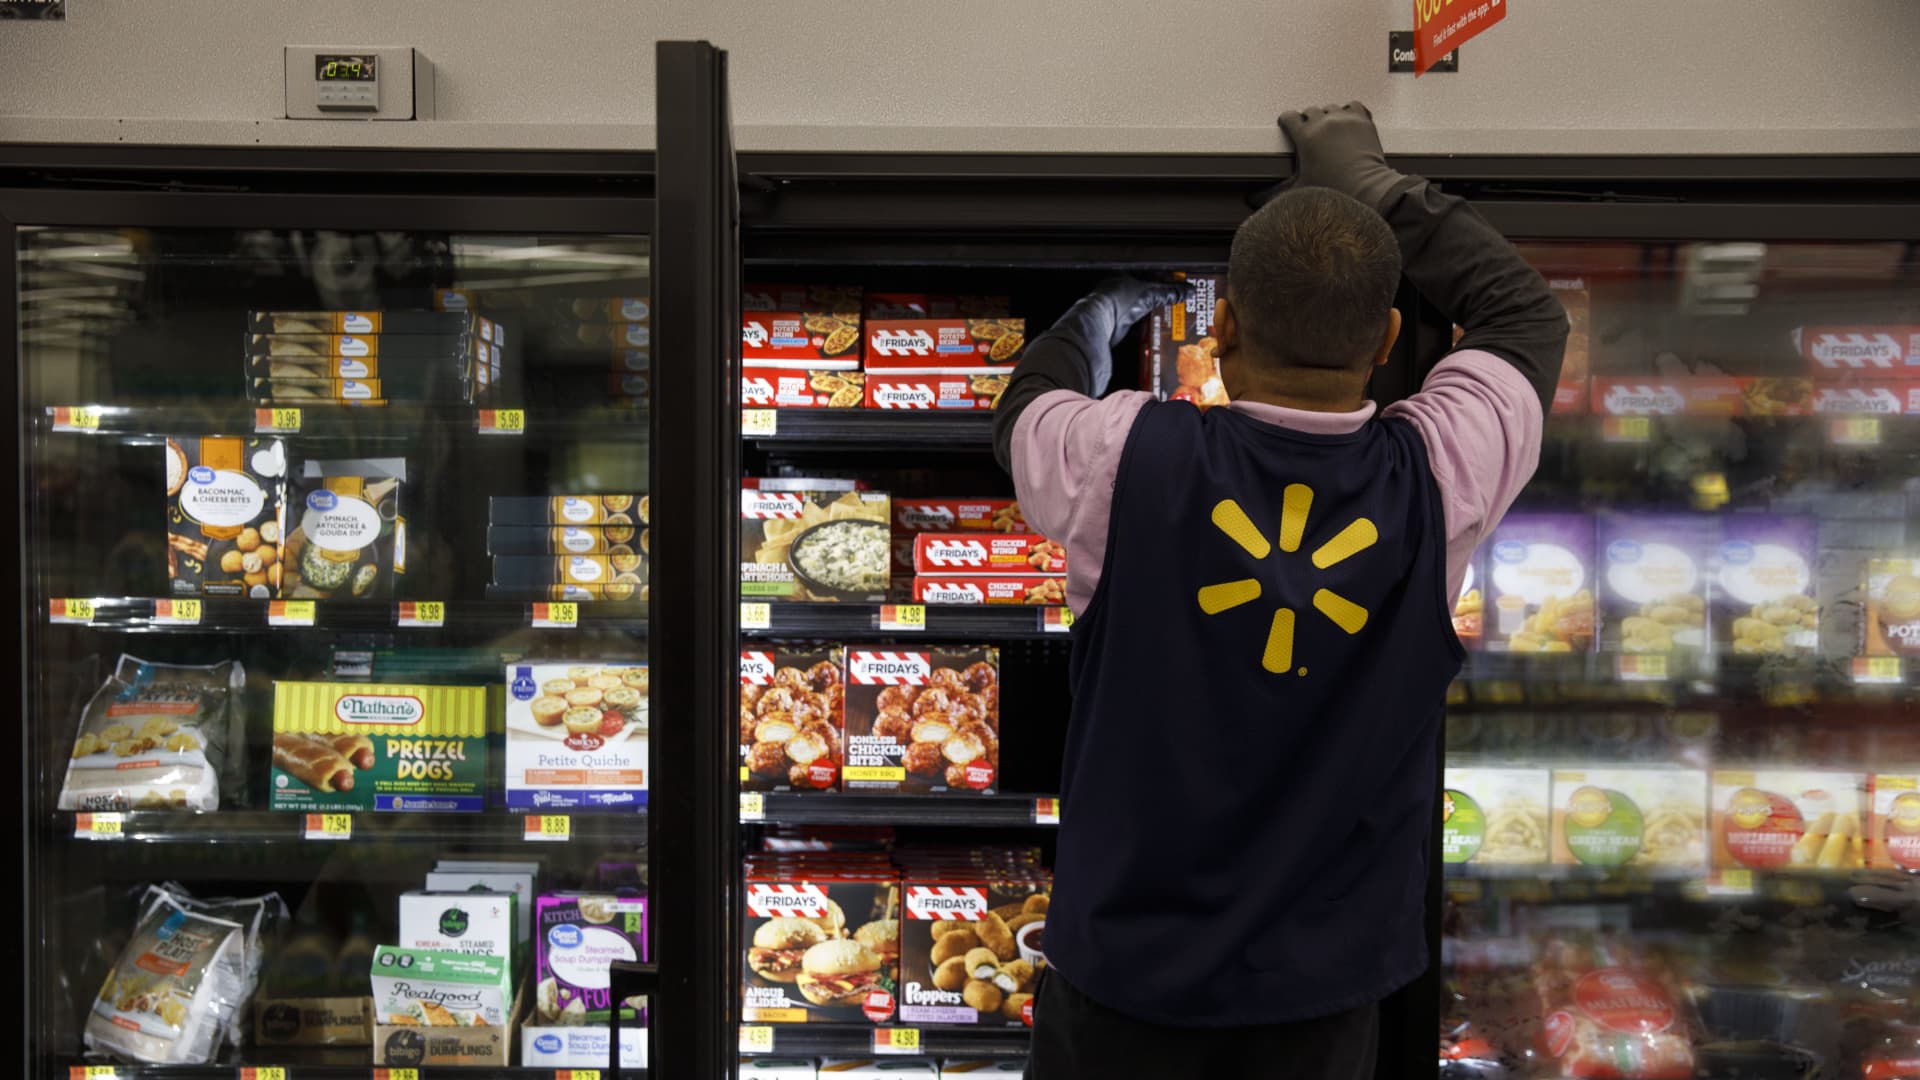 Walmart launches new grocery brand Bettergoods [Video]